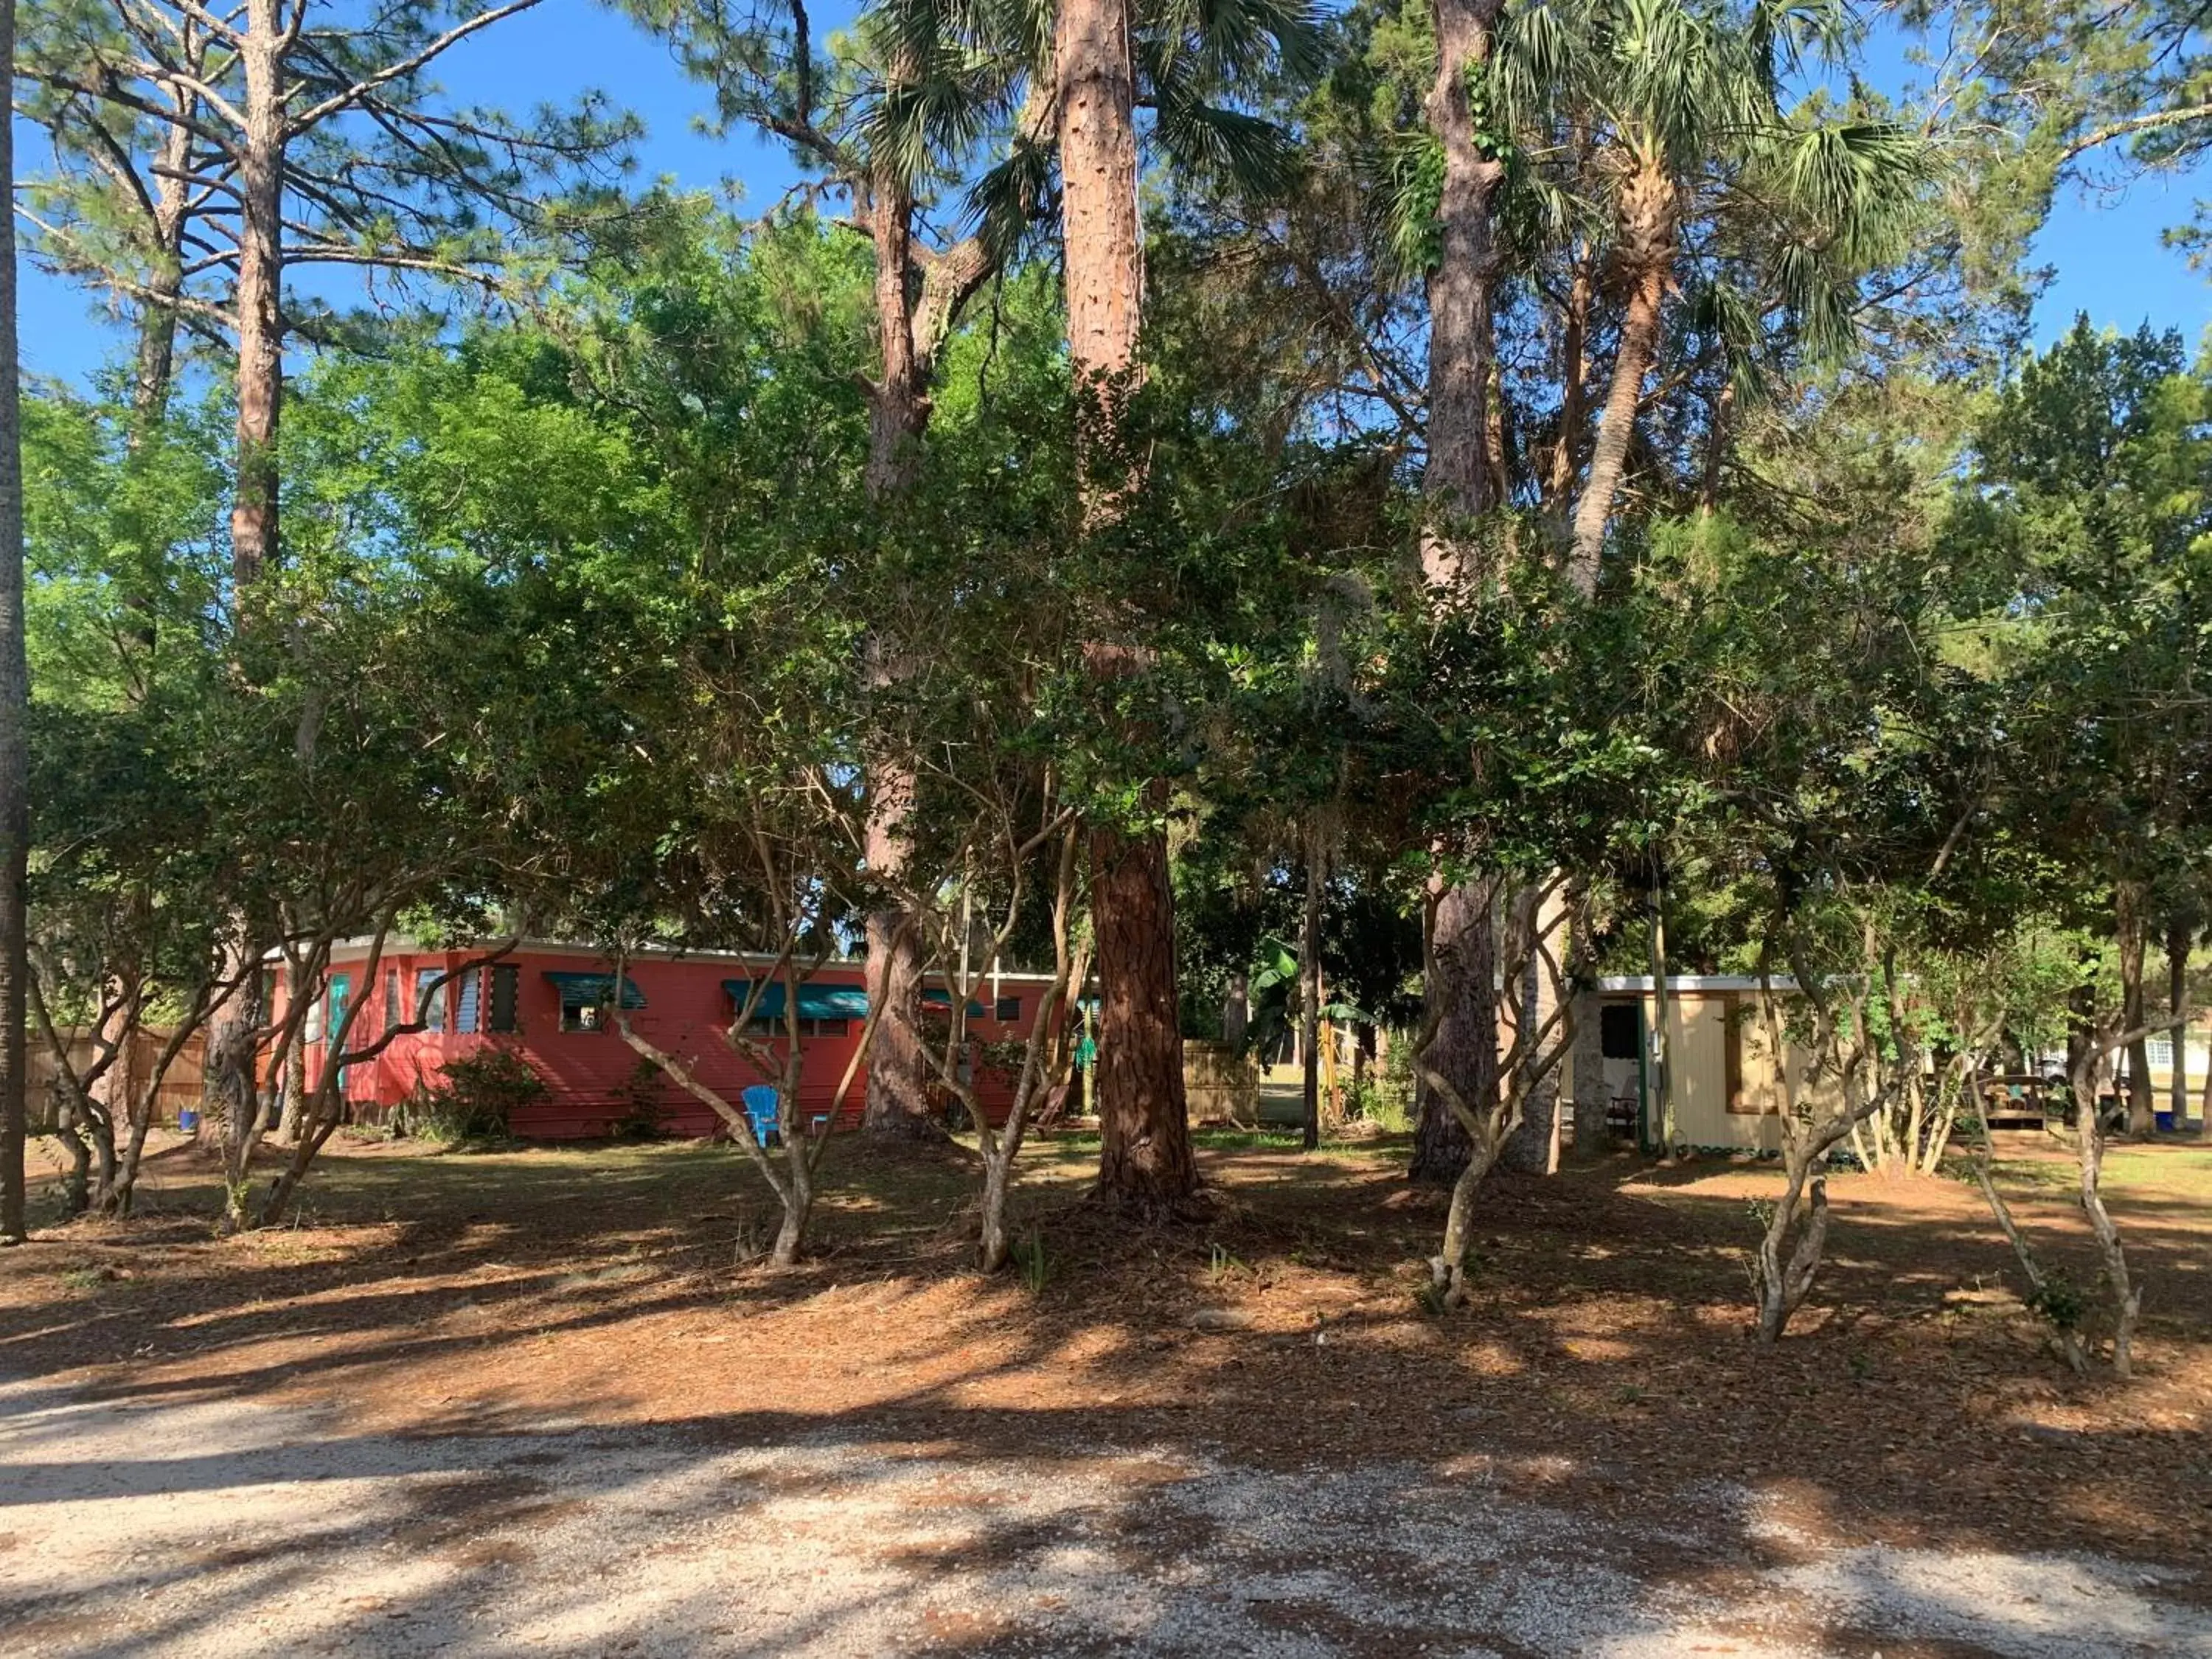 Property building, Children's Play Area in Nature Coast Inn & Cottages